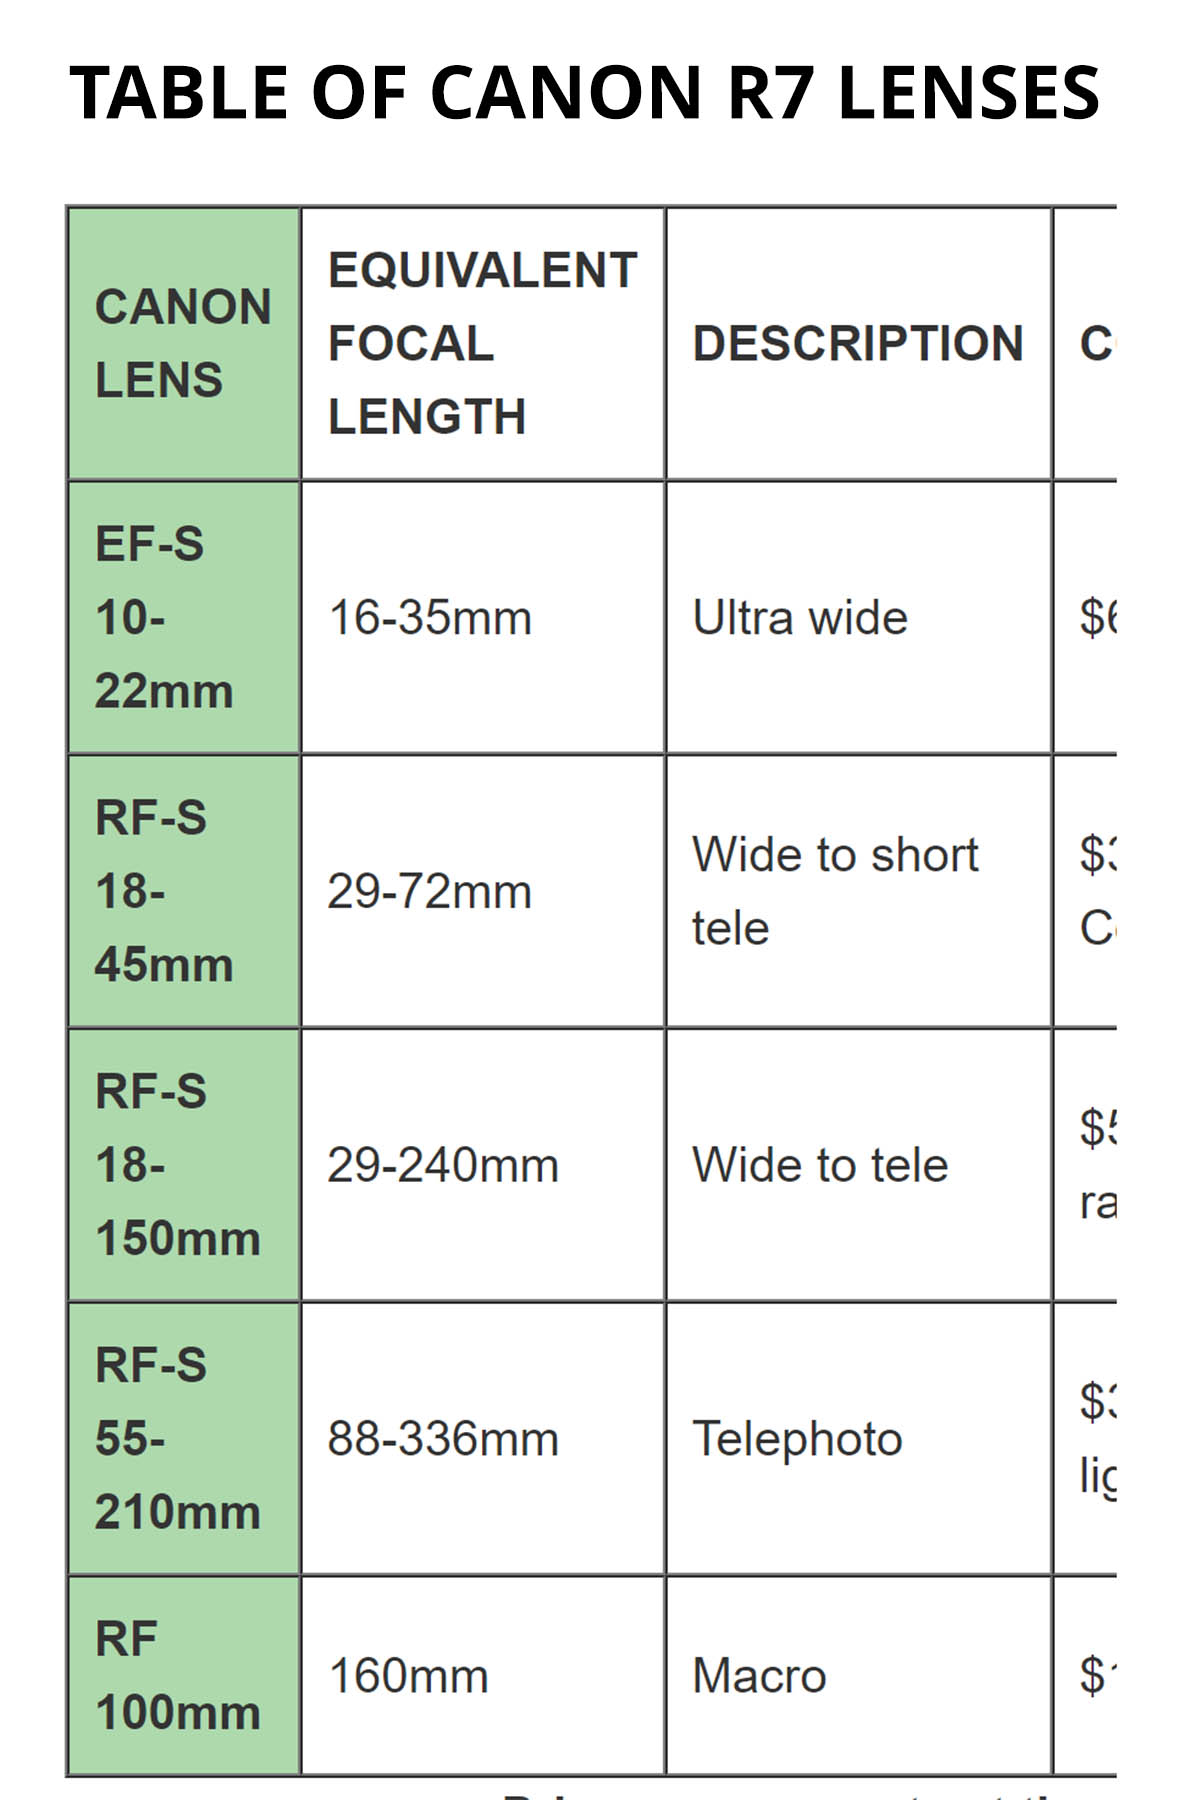 Table of Canon R7 Lenses